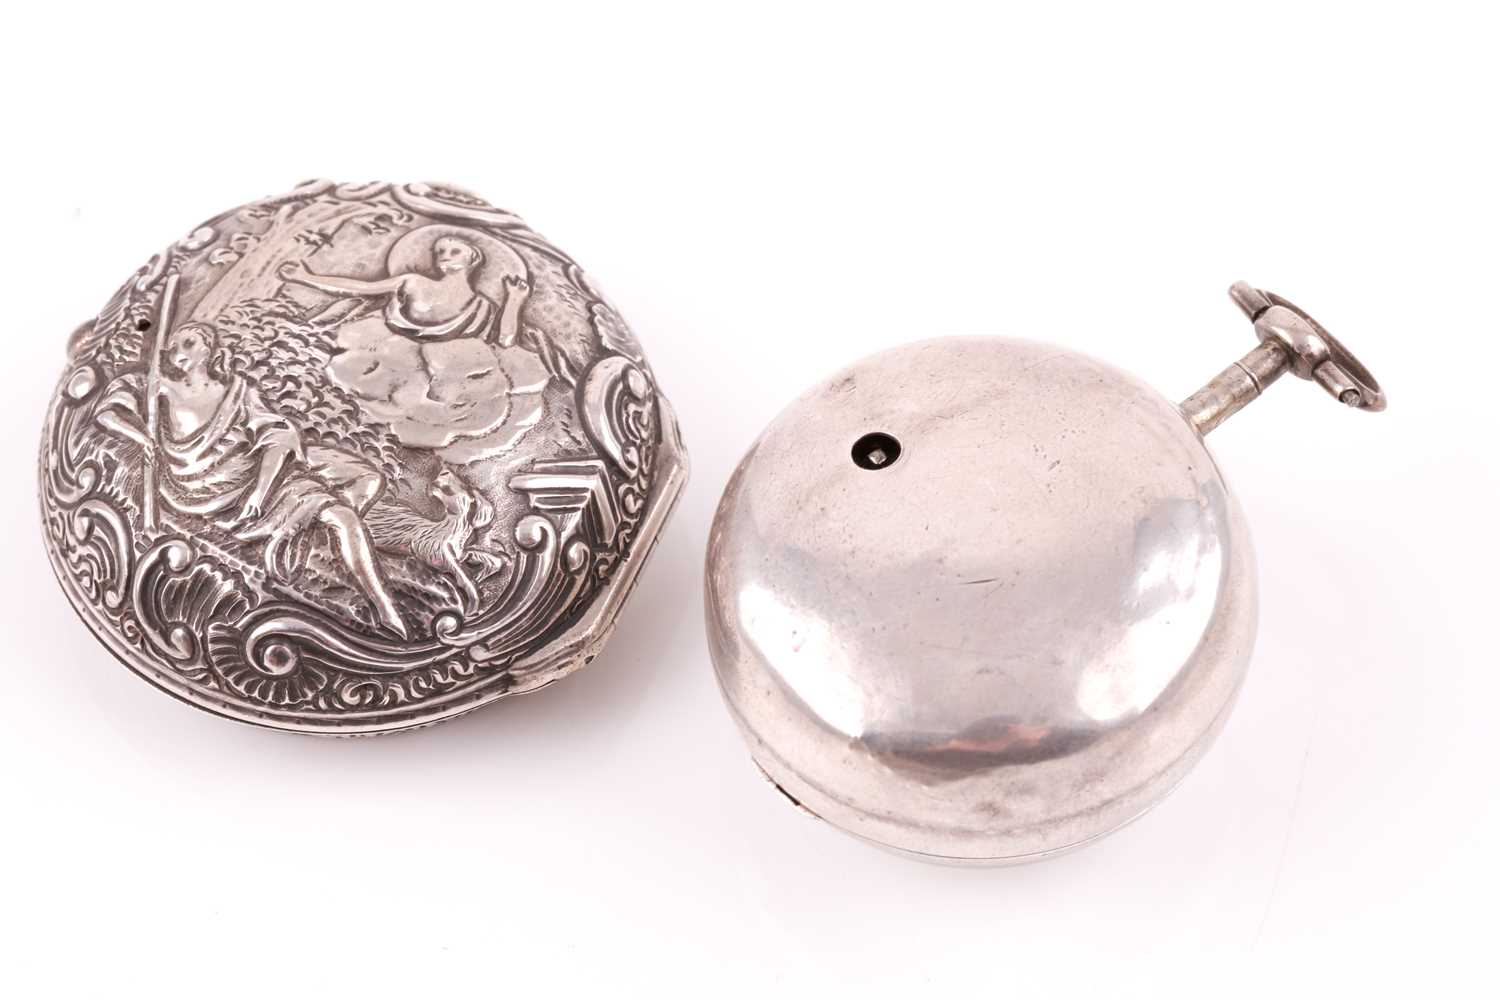 A George III silver pair-cased pocket watch, by Ovingham of London, hallmarked London 1770, - Image 10 of 13